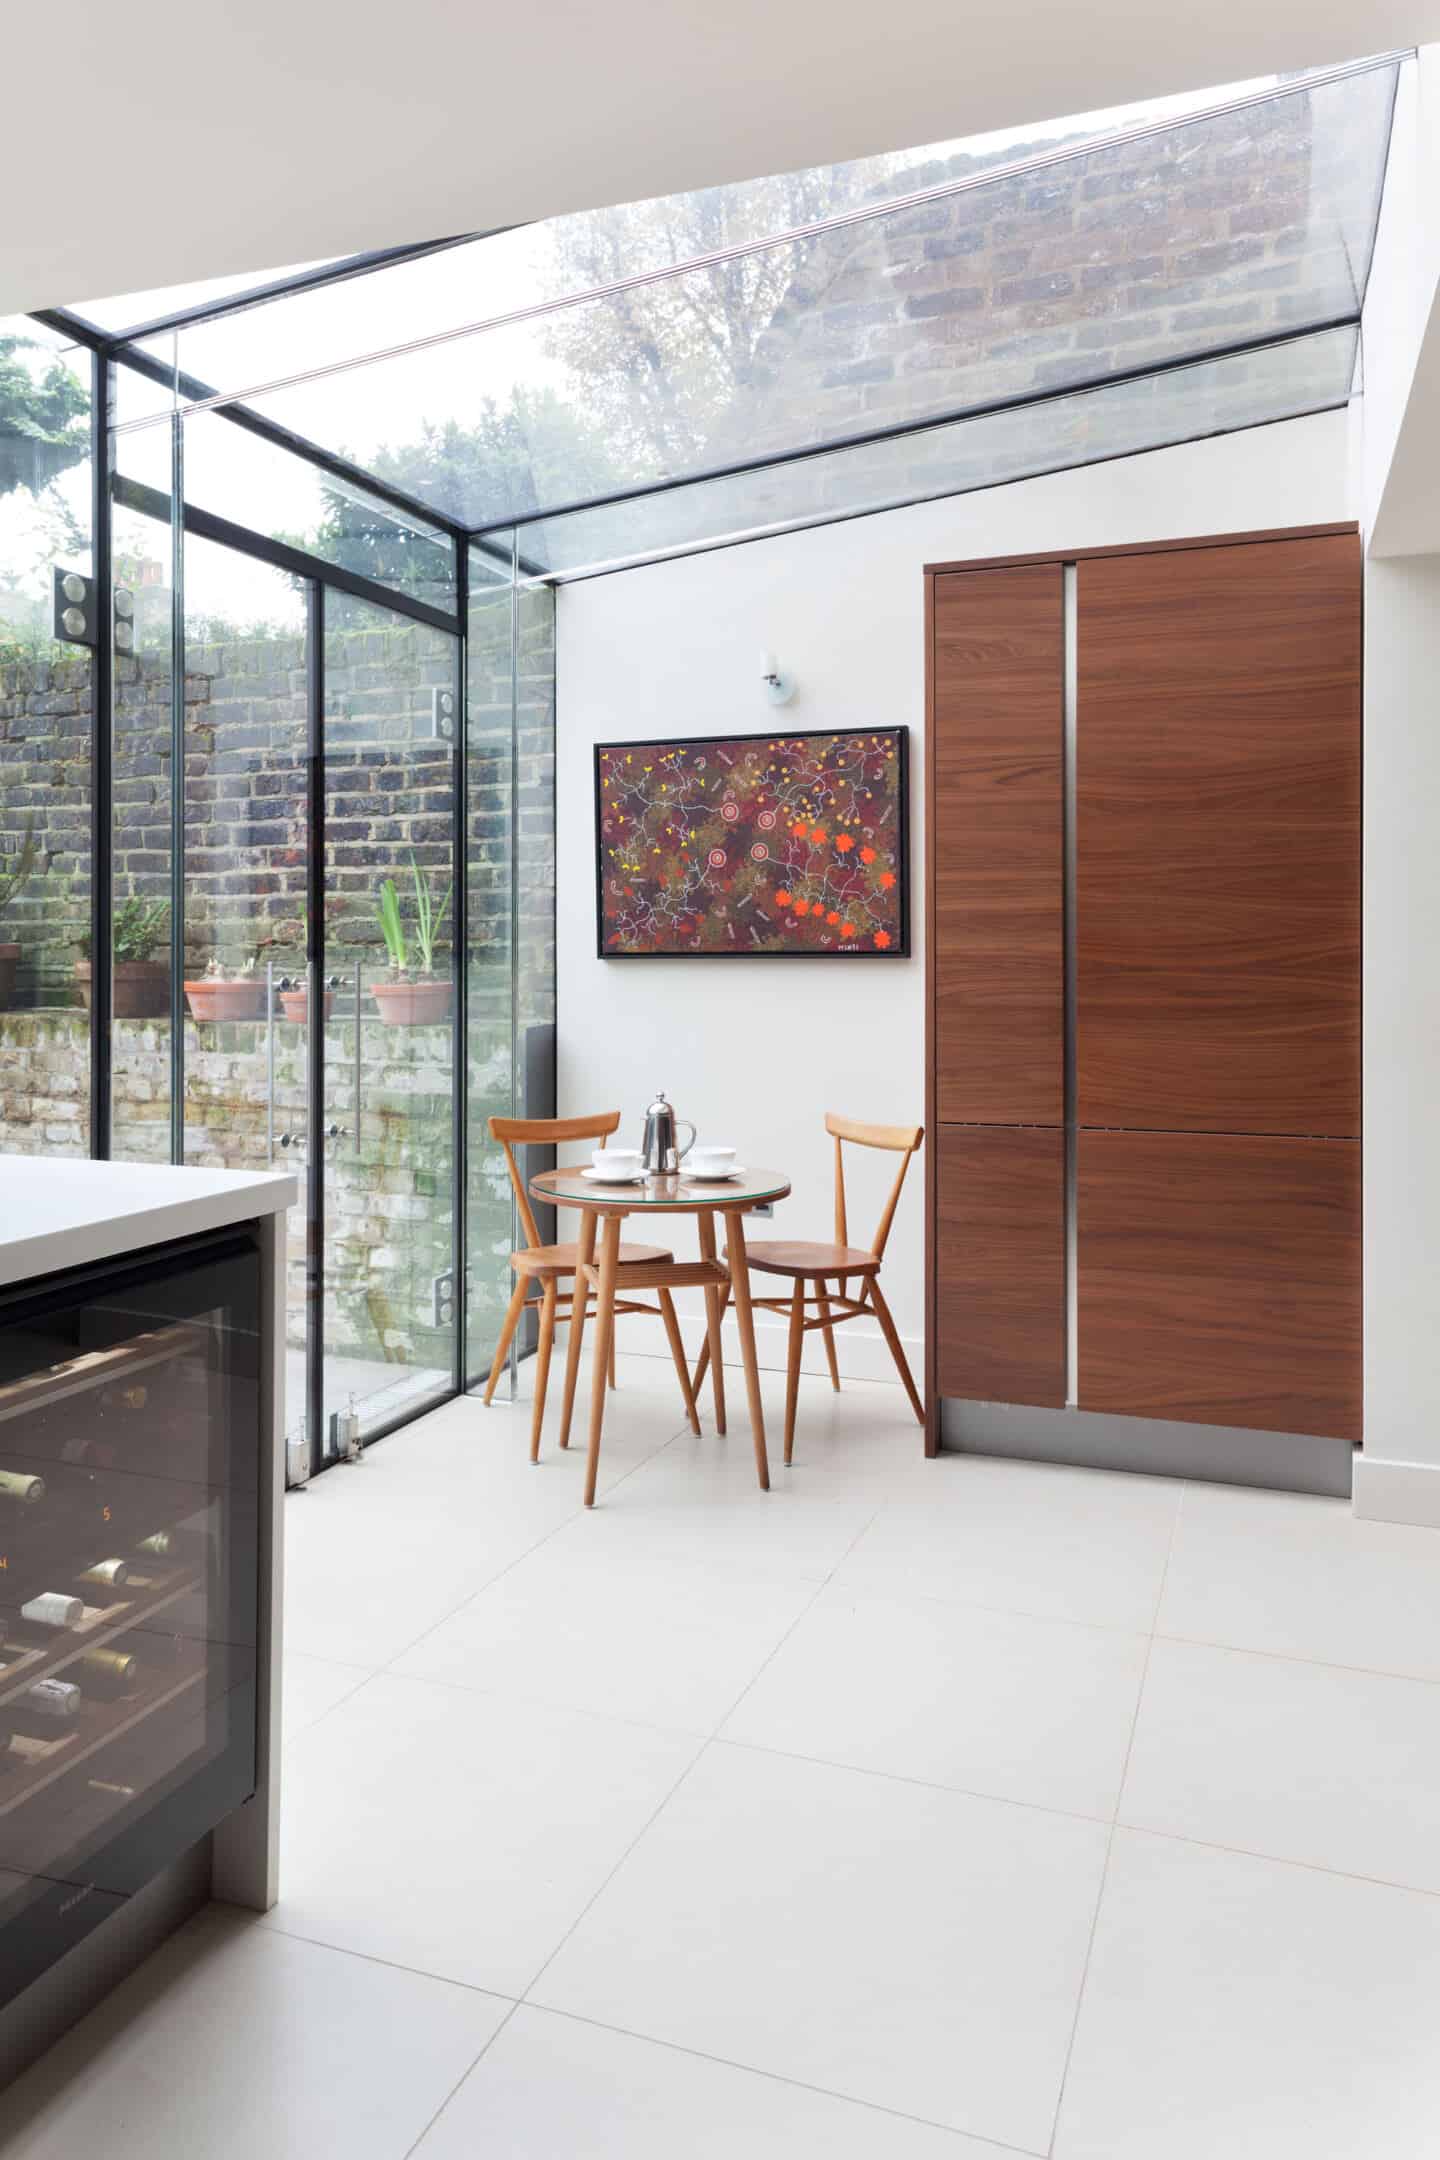 A glass box rear extension floods a kitchen with natural light